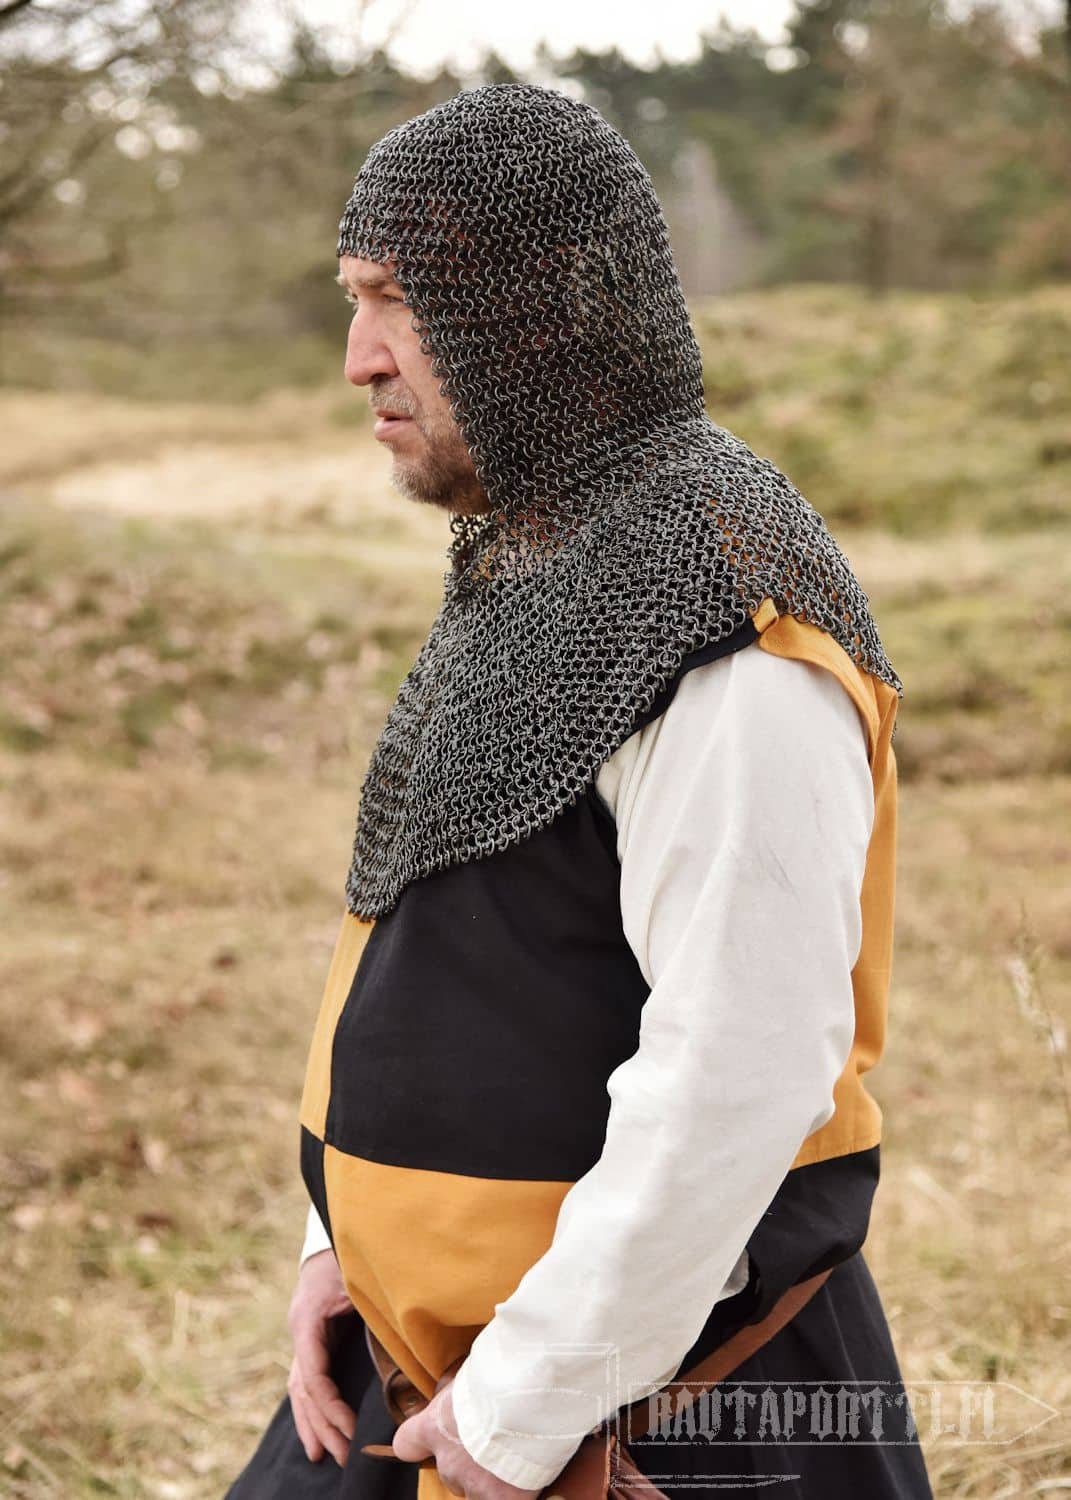 Battle Ready Chain Mail Coif Armor by Armory Replicas, Swords